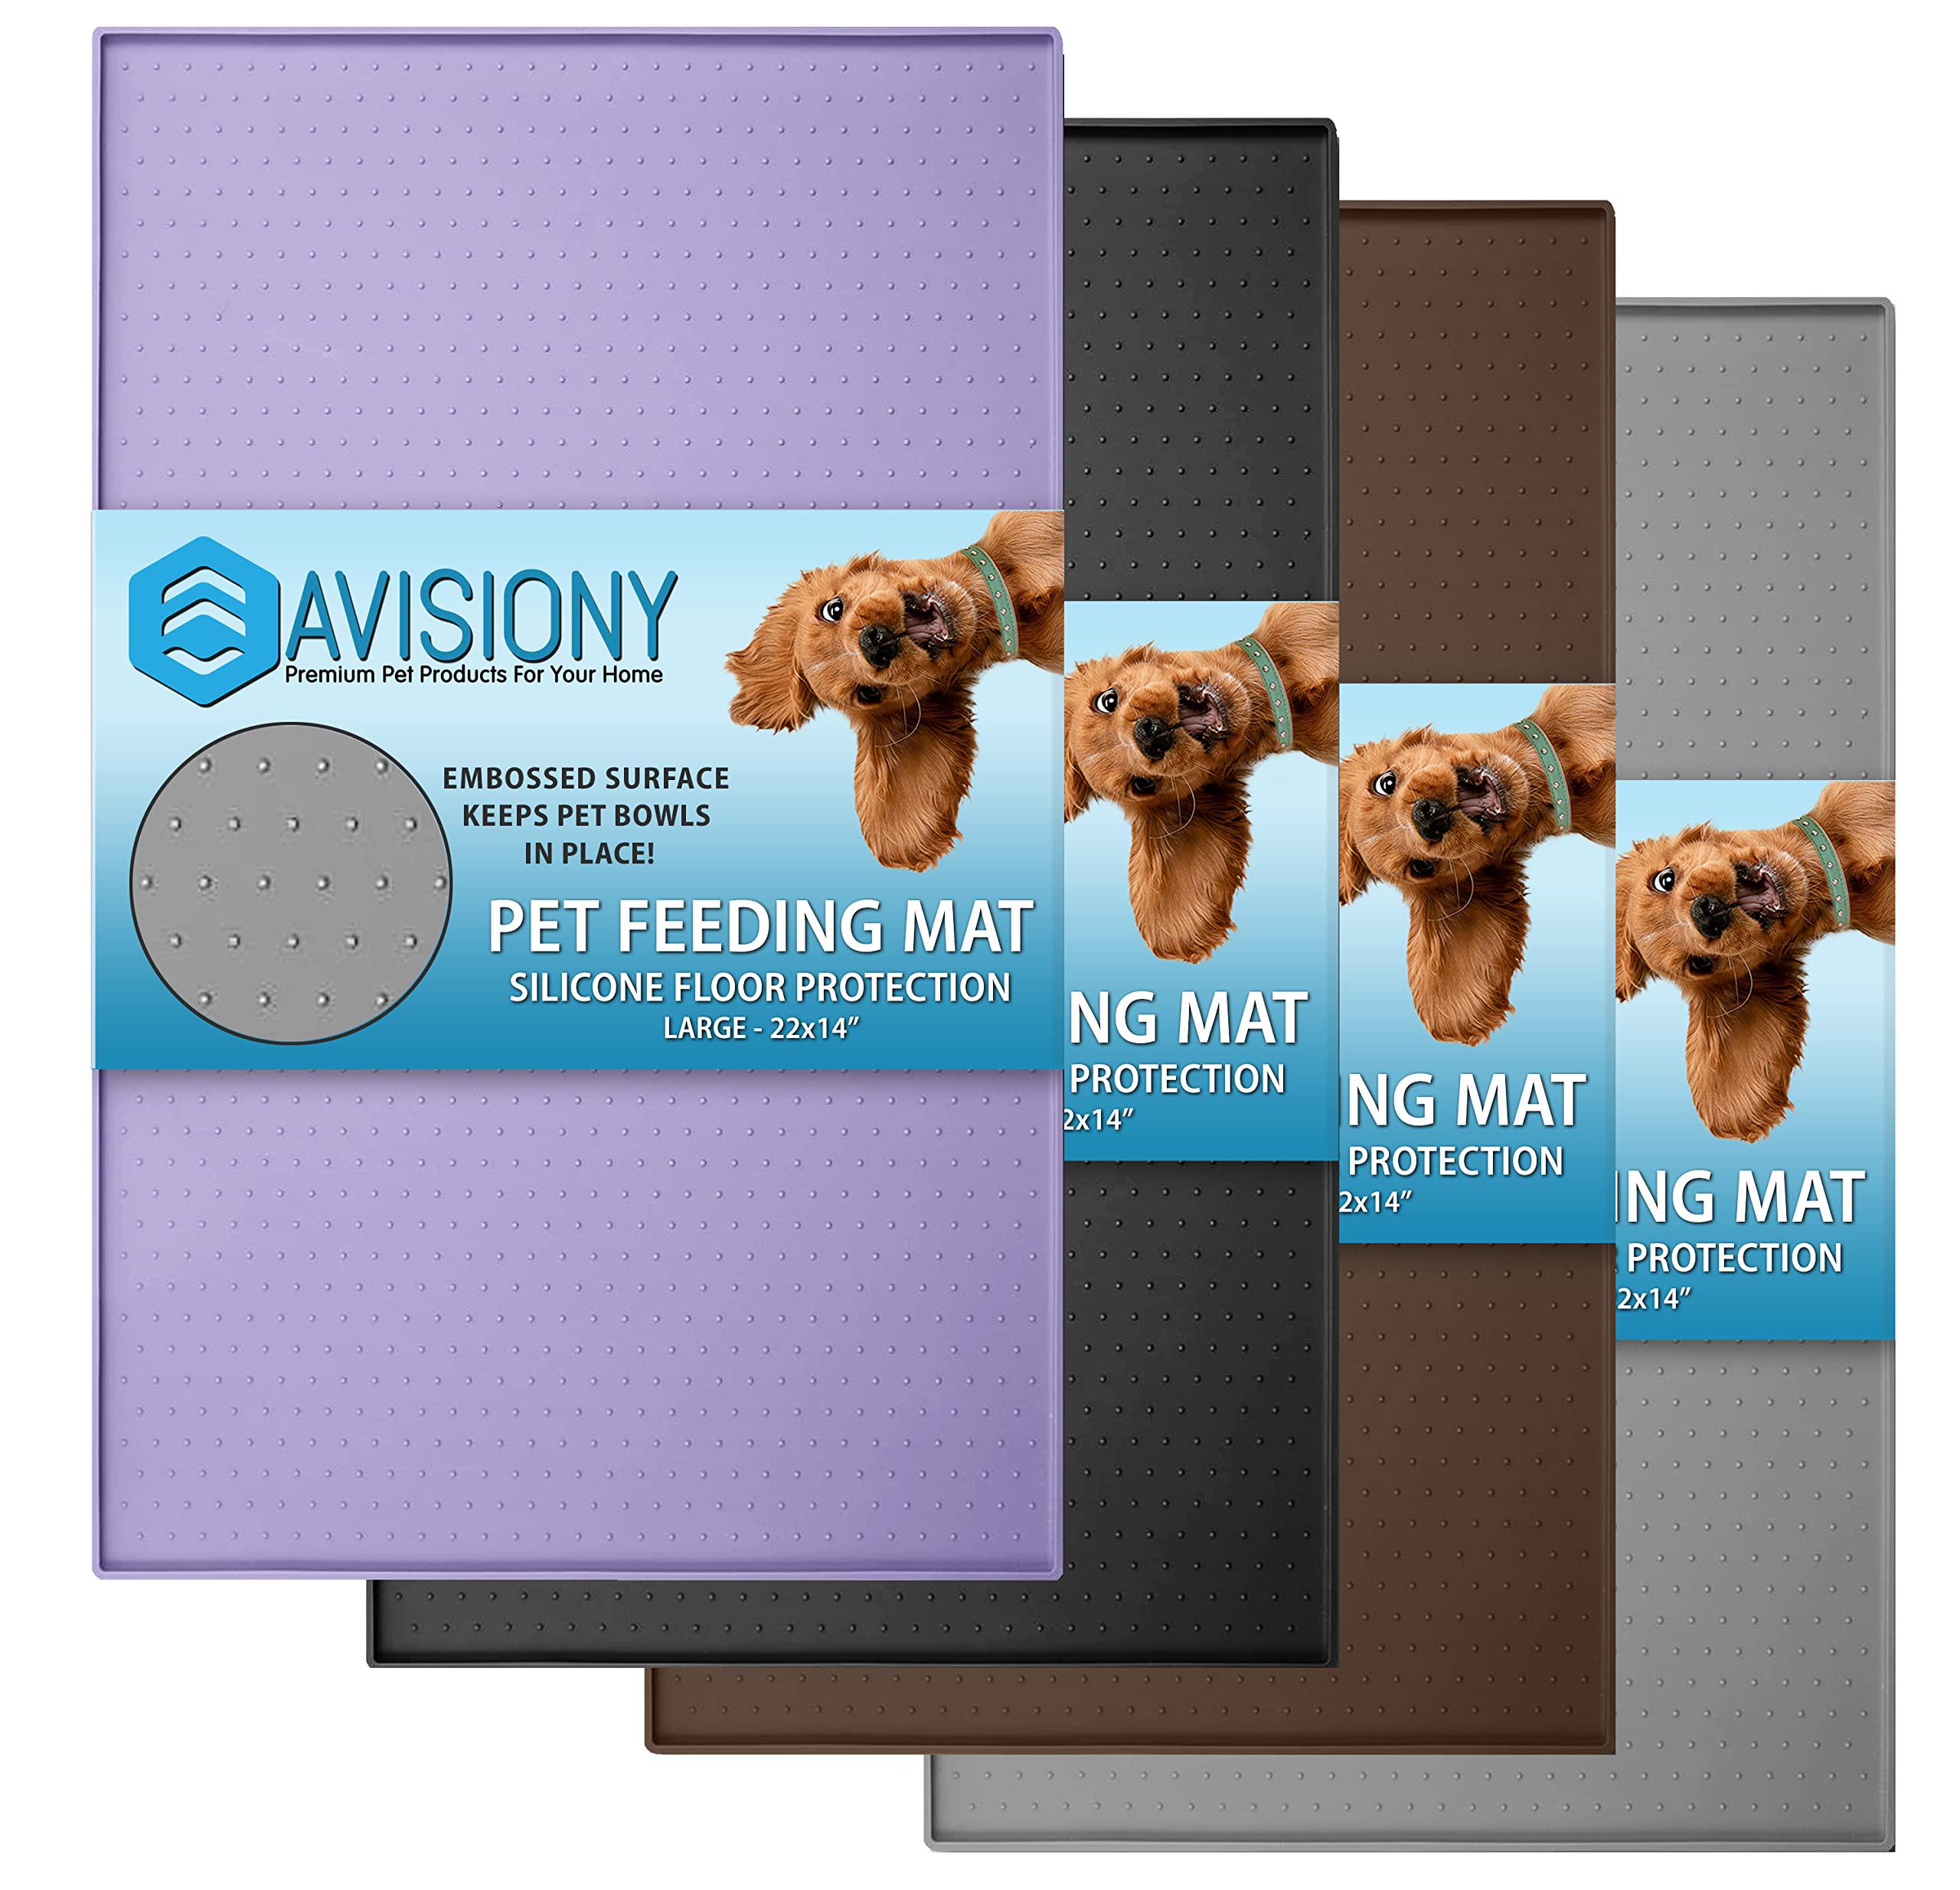 Avisiony dog feeding mat for floors waterproof, anti-slip pet food mat with  raised edges to prevent spills, 22 x 14 tray designed to